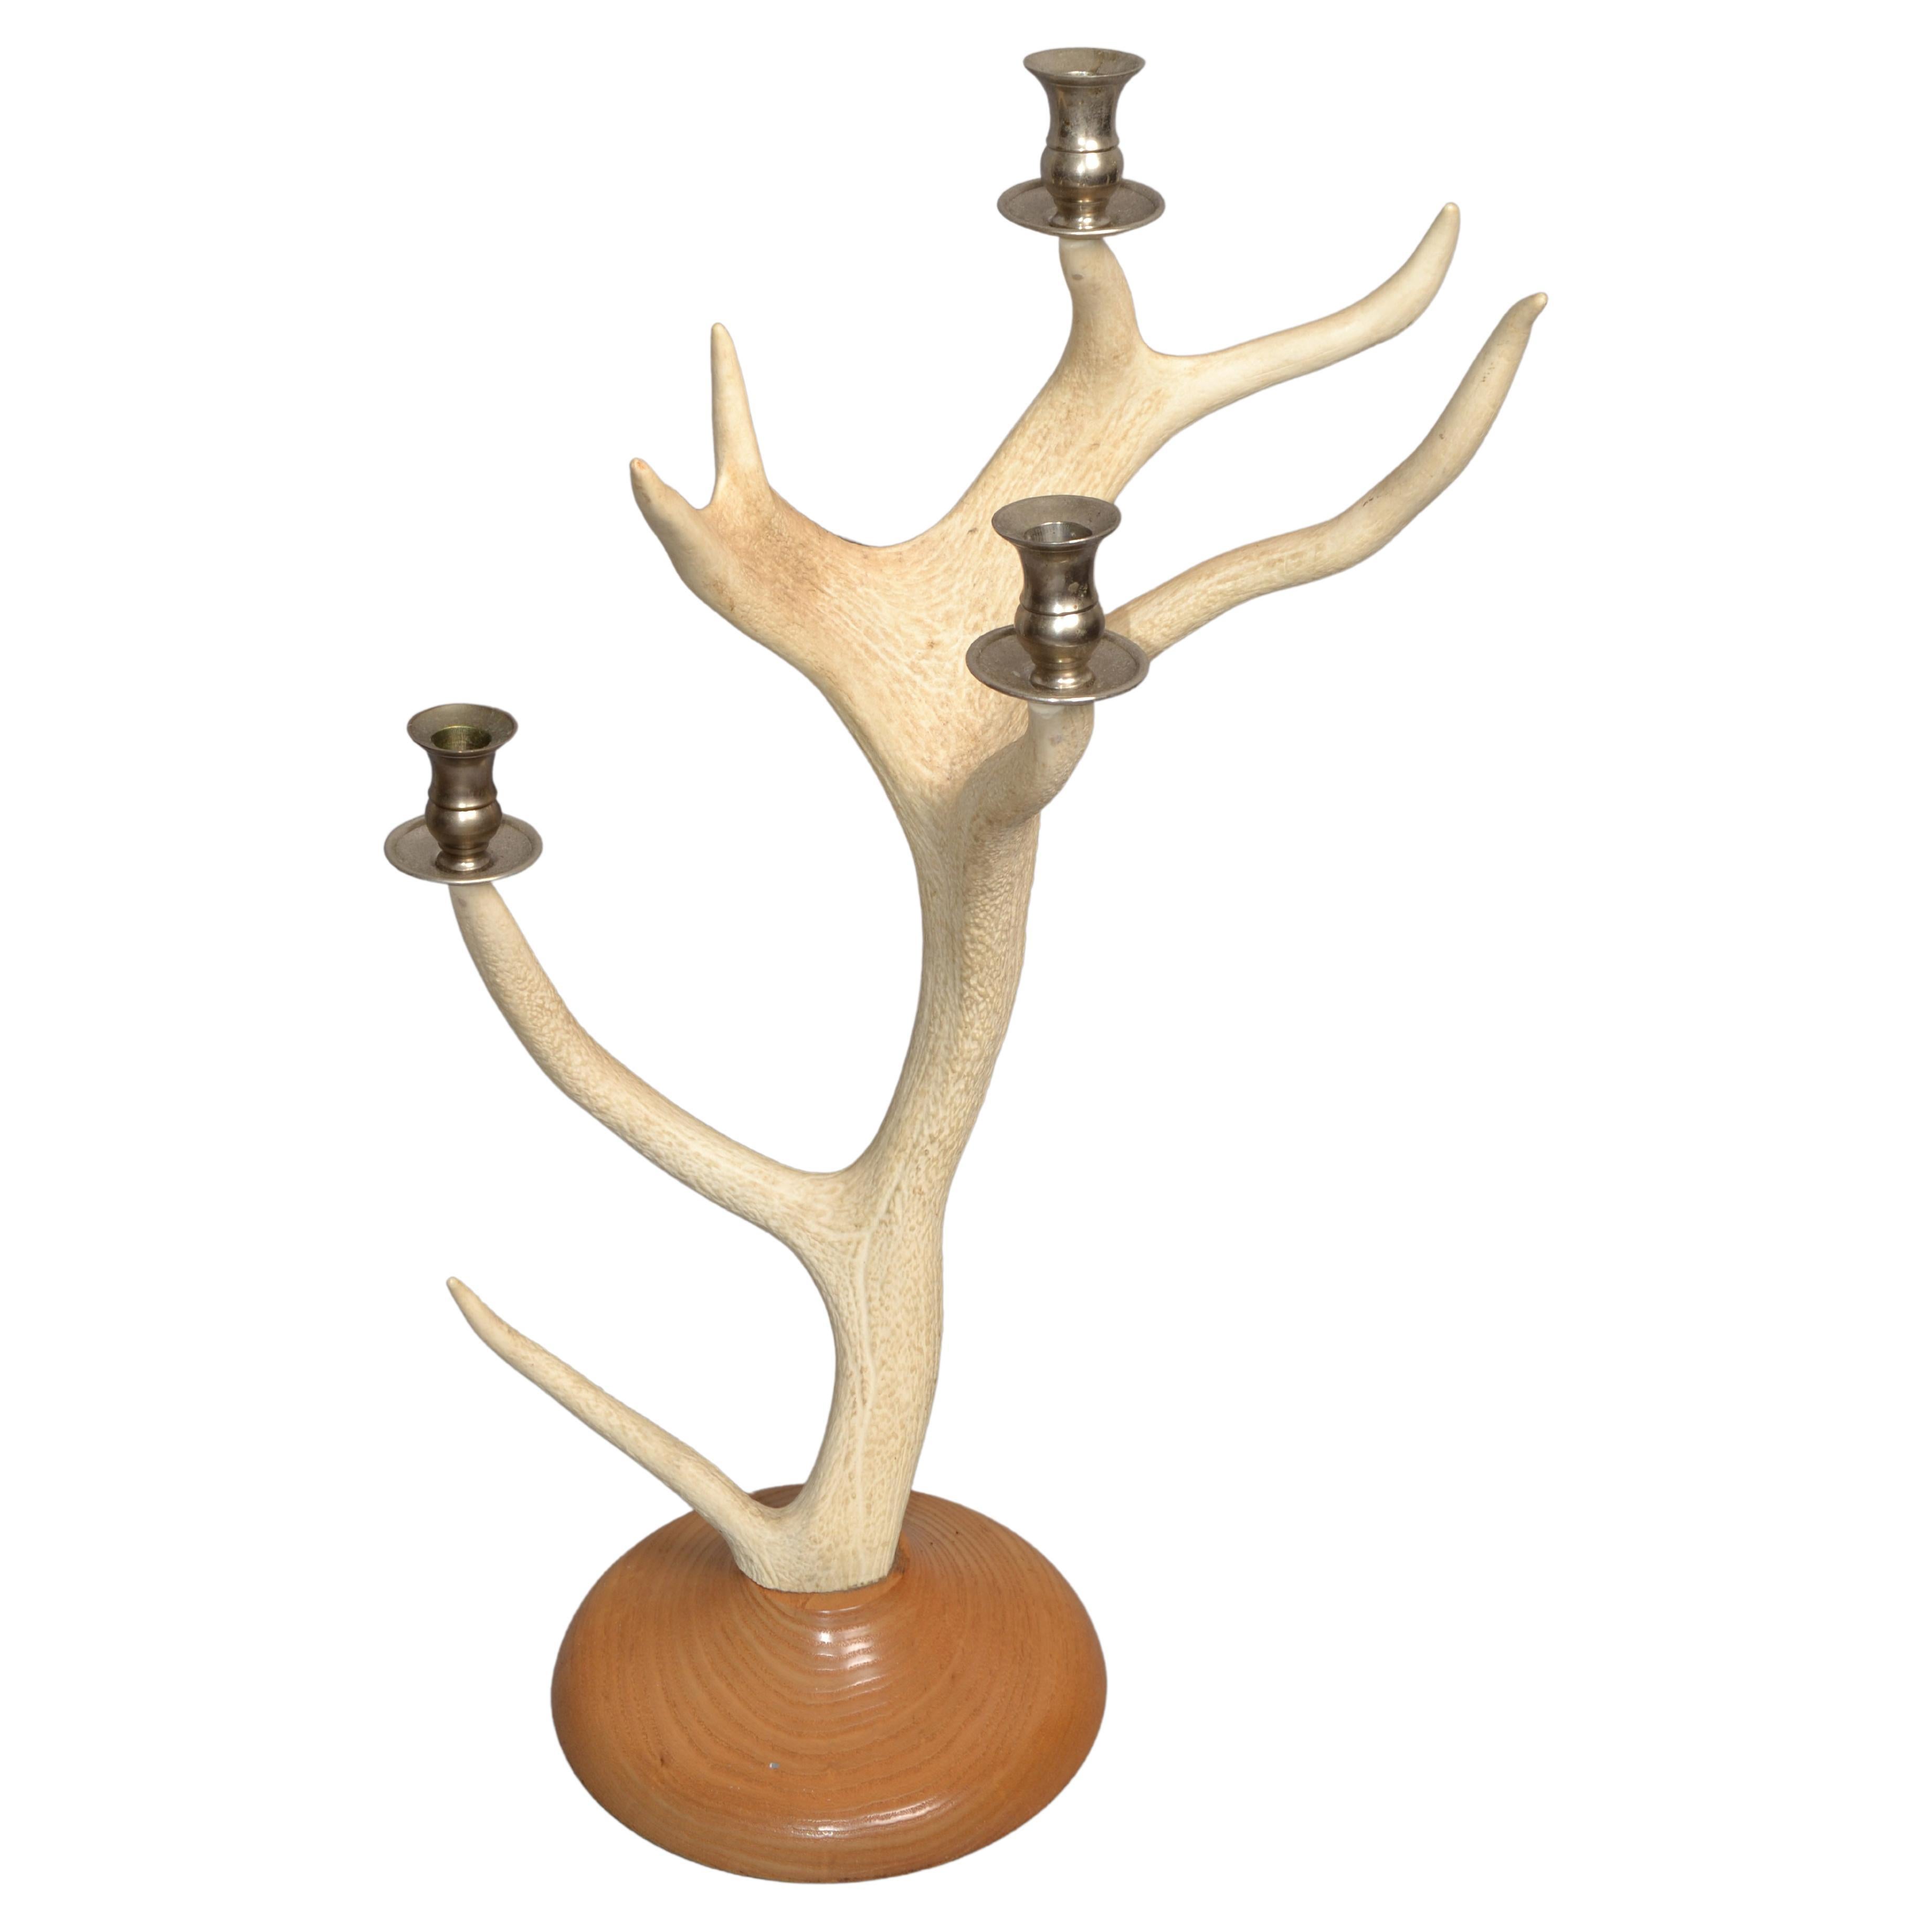 Rustic Taxidermy White Tail Deer Buck Antlers Horns Candle Holder Oak Round Base